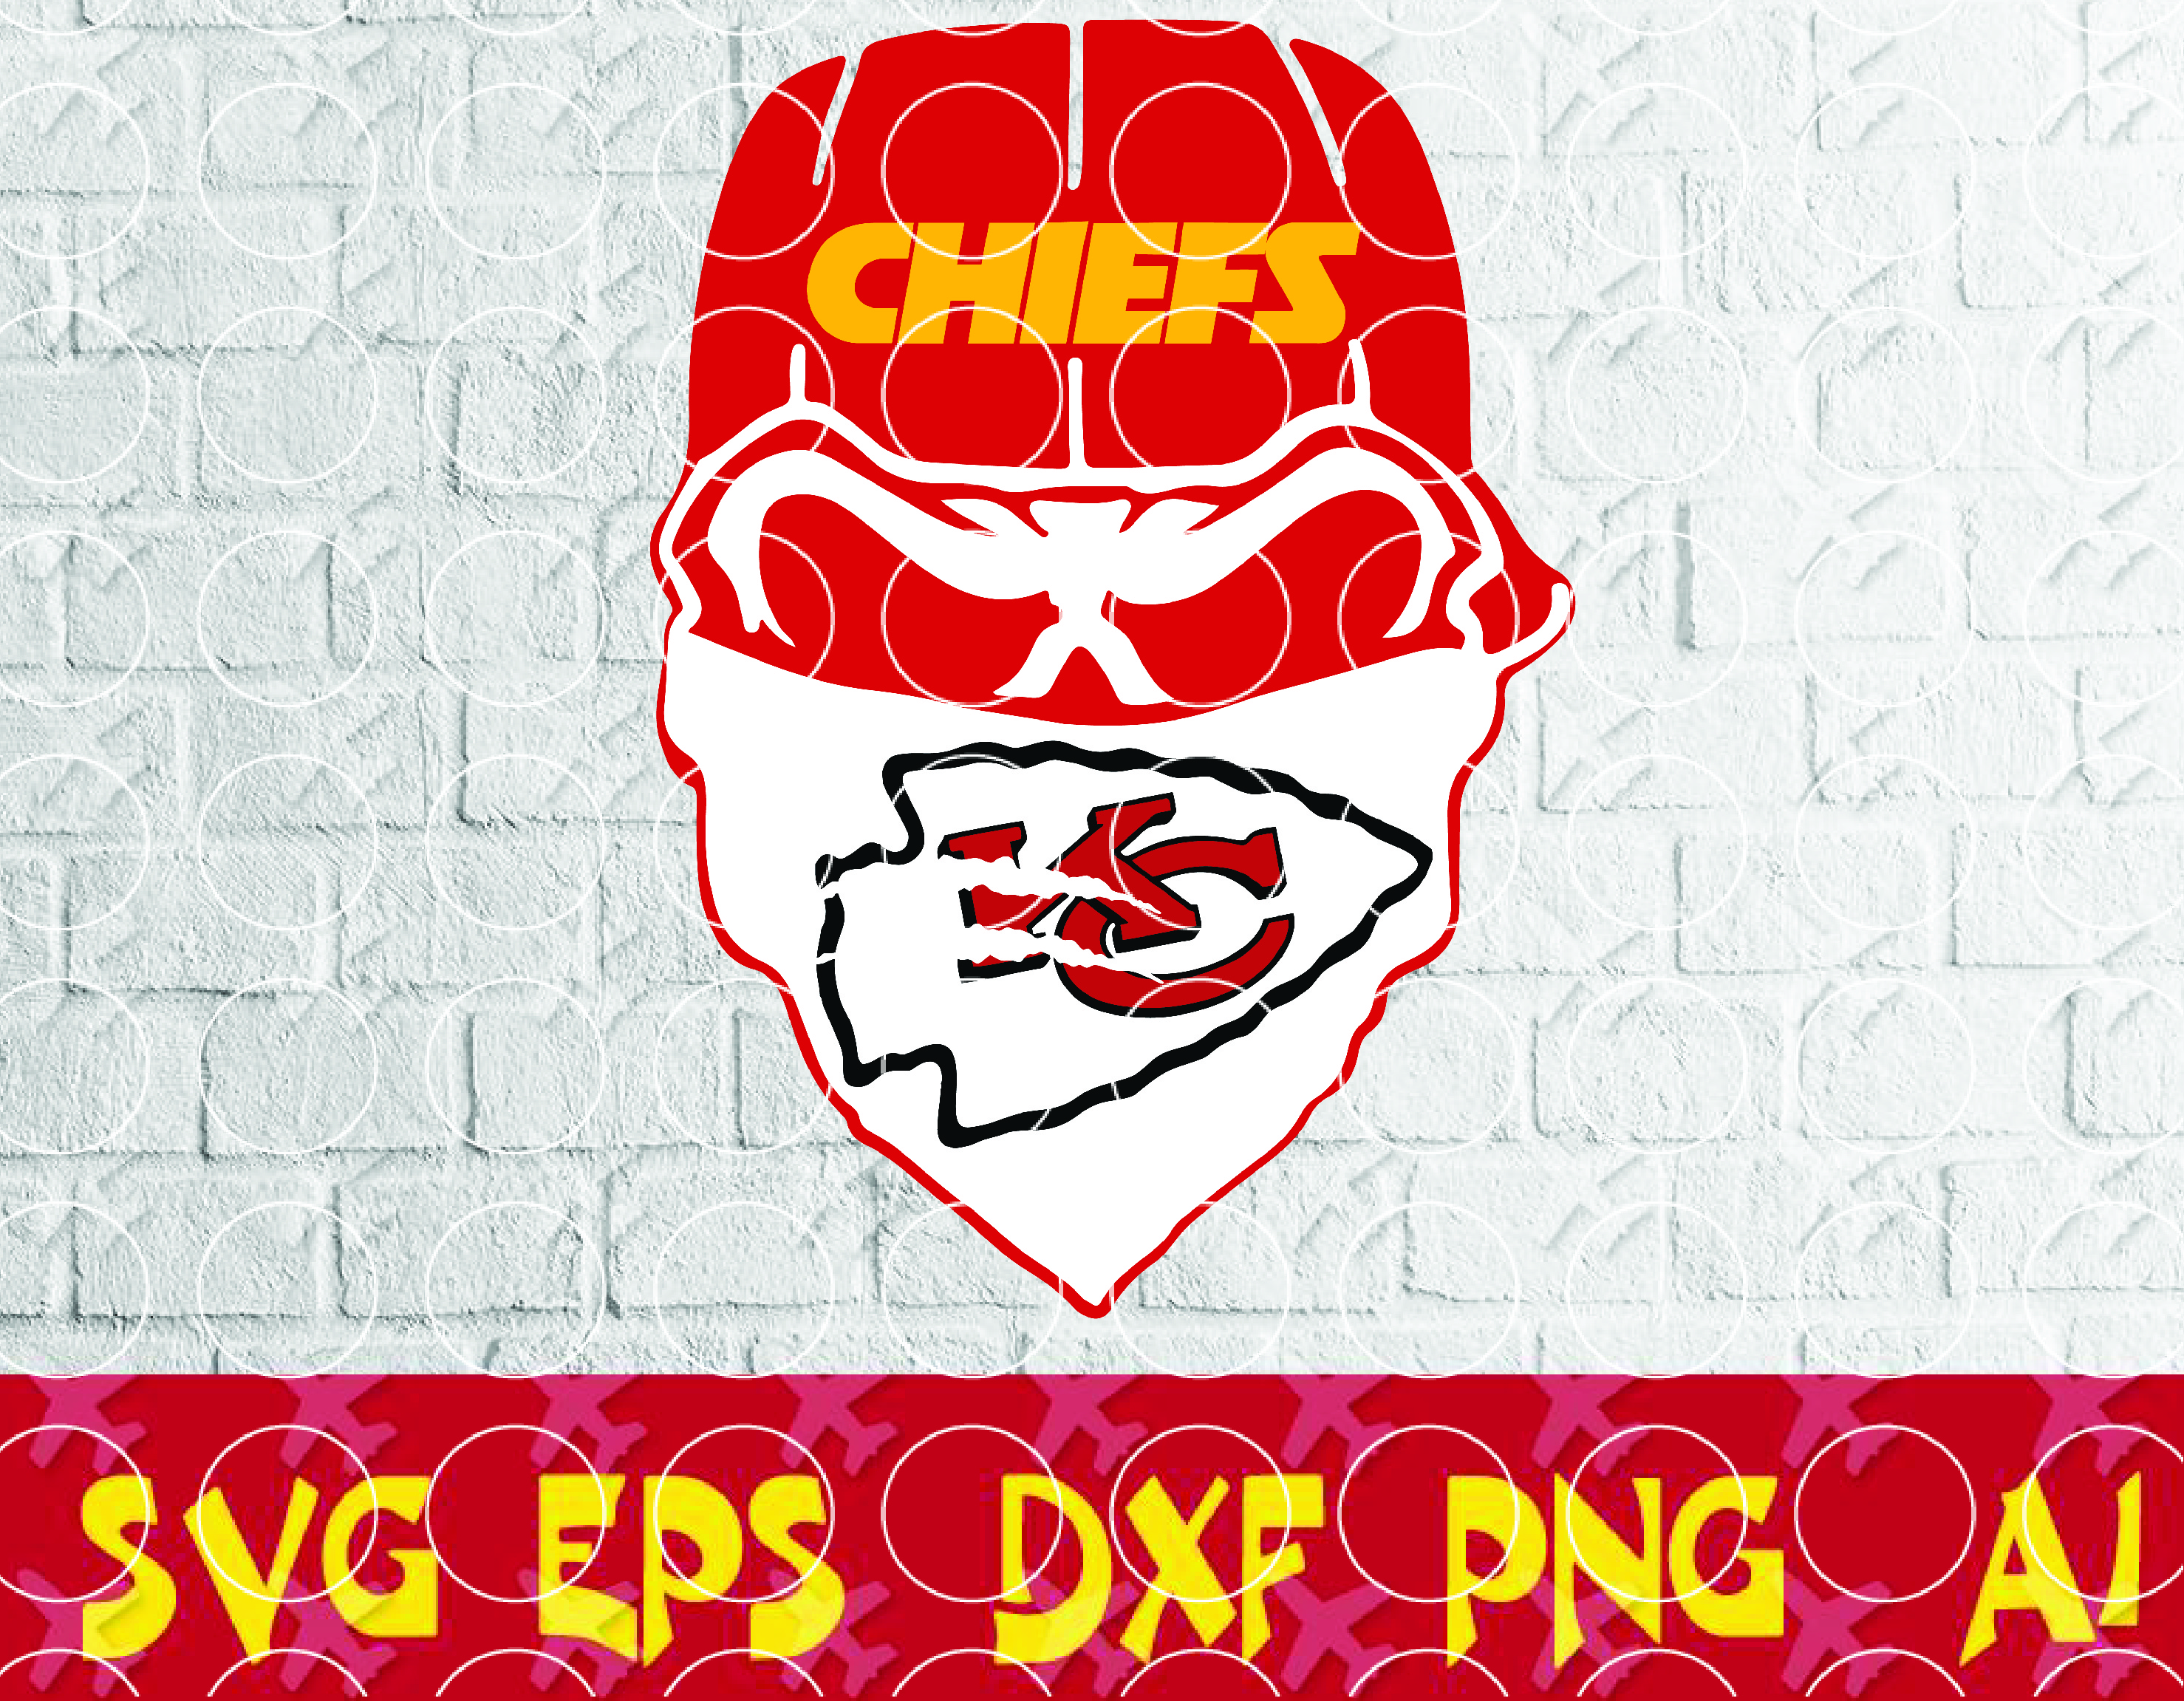 Download Kansas City Chiefs Glitter Skull Svg Set Of Svg Eps Dxf Files Of A Sports Team For Cutting Design T Shirts Mugs Projects Crafts Designbtf Com